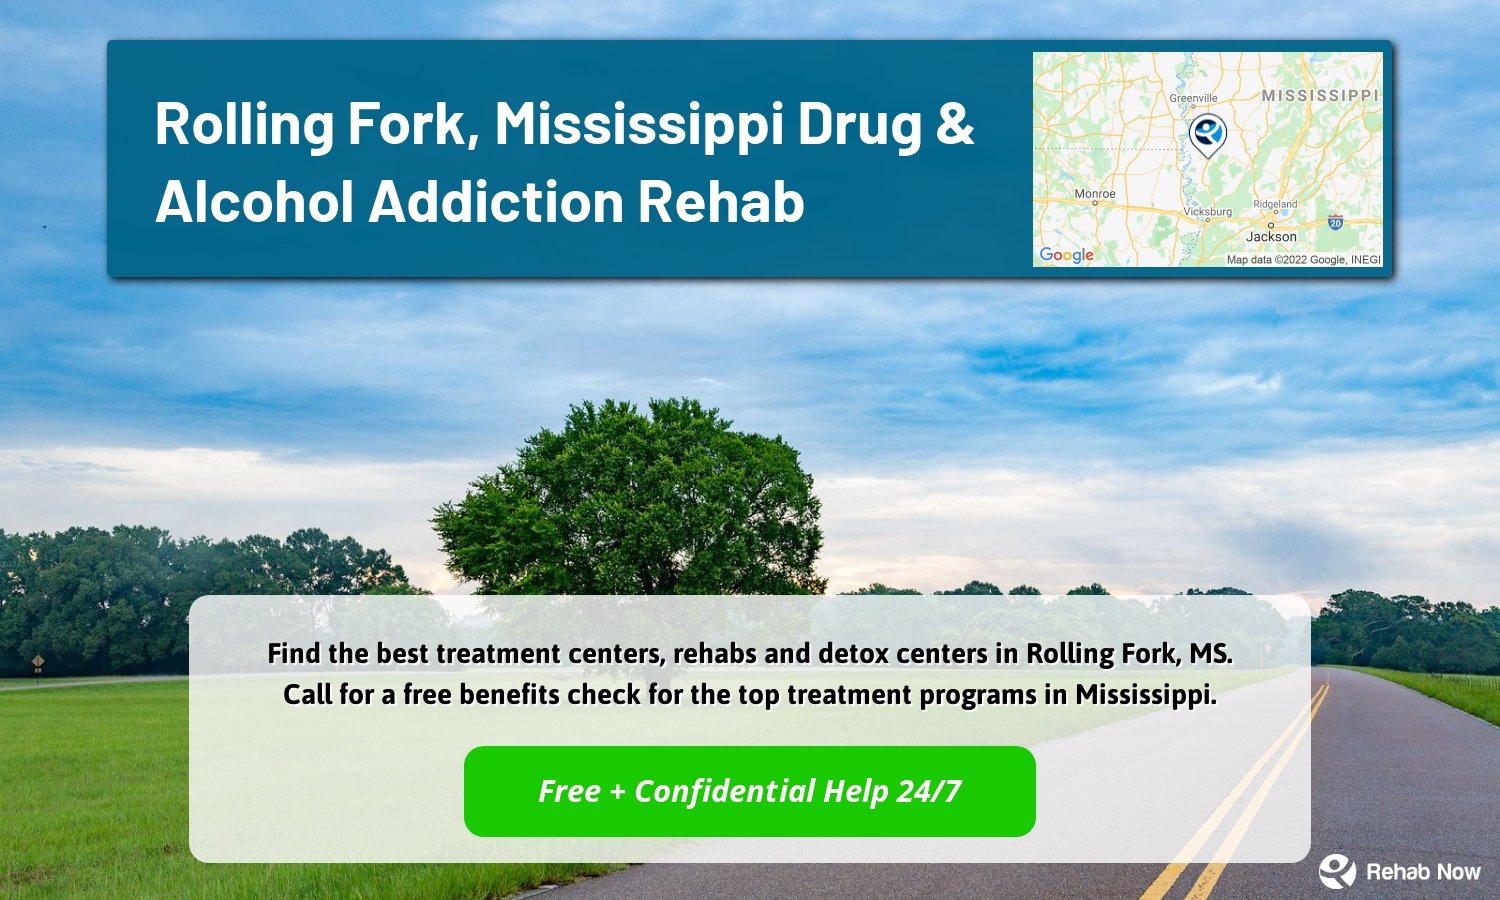 Find the best treatment centers, rehabs and detox centers in Rolling Fork, MS. Call for a free benefits check for the top treatment programs in Mississippi.